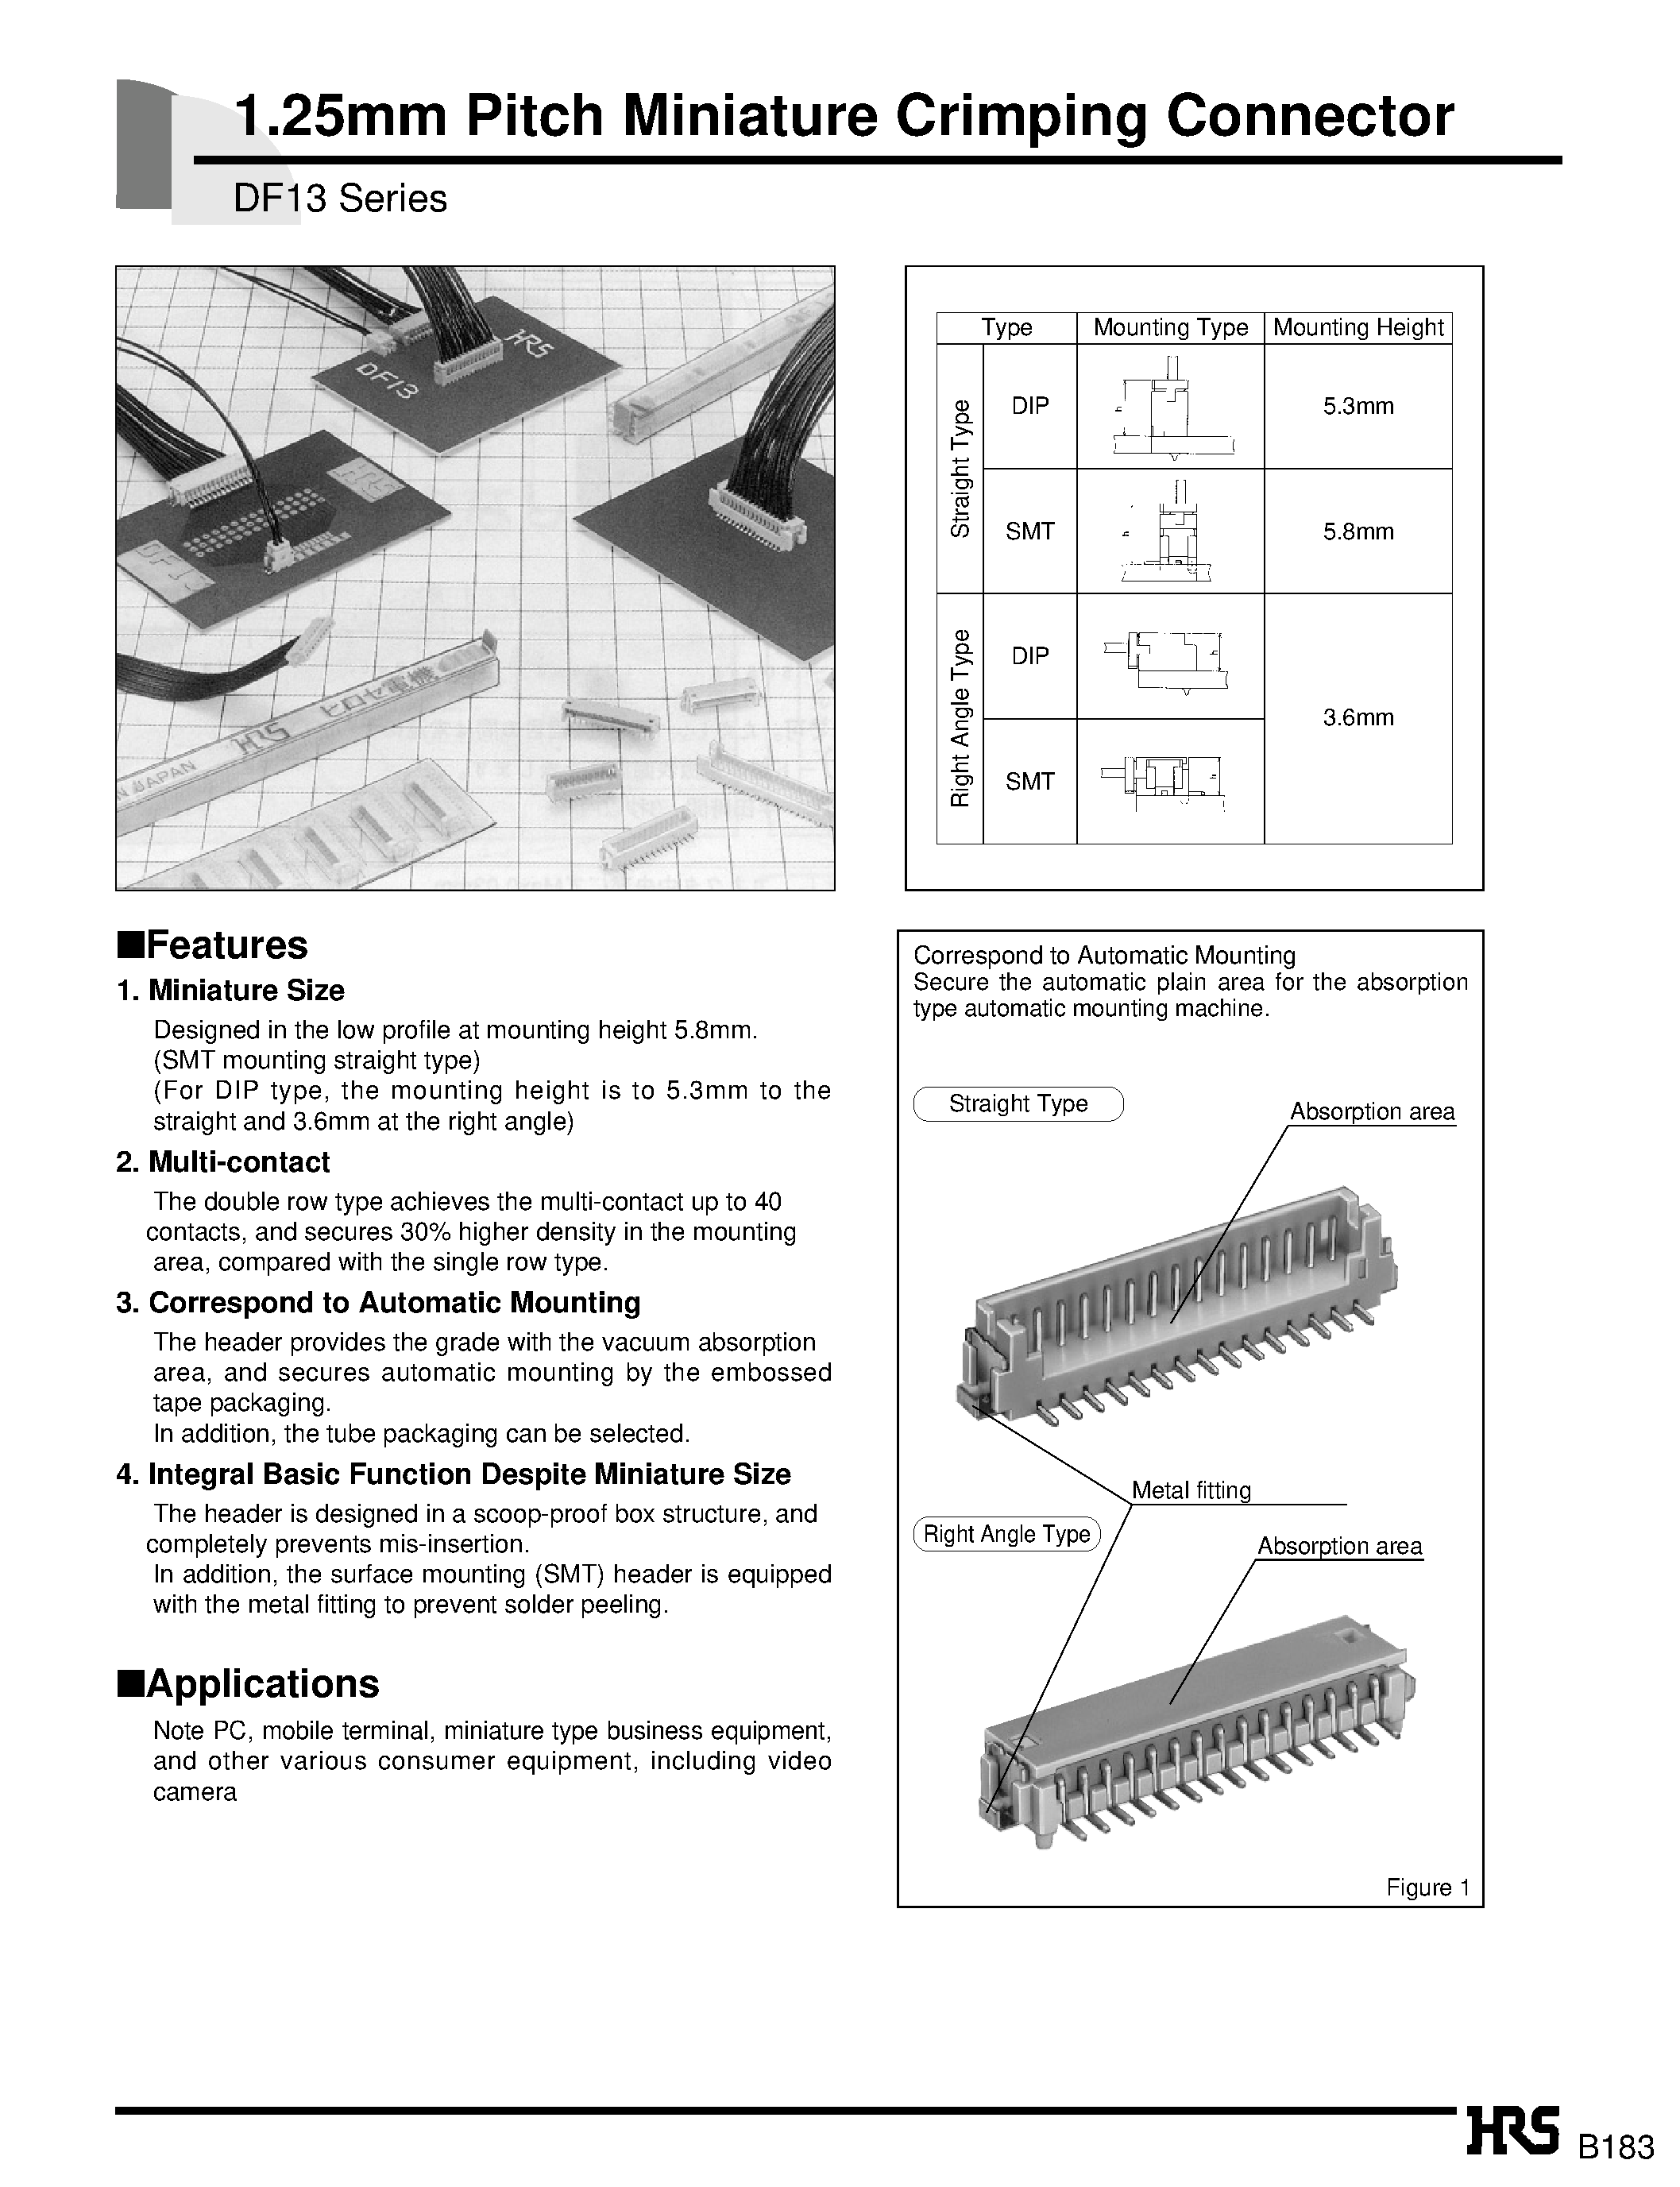 Datasheet DF13-10P-1.25C - 1.25mm Pitch Miniature Crimping Connector page 1